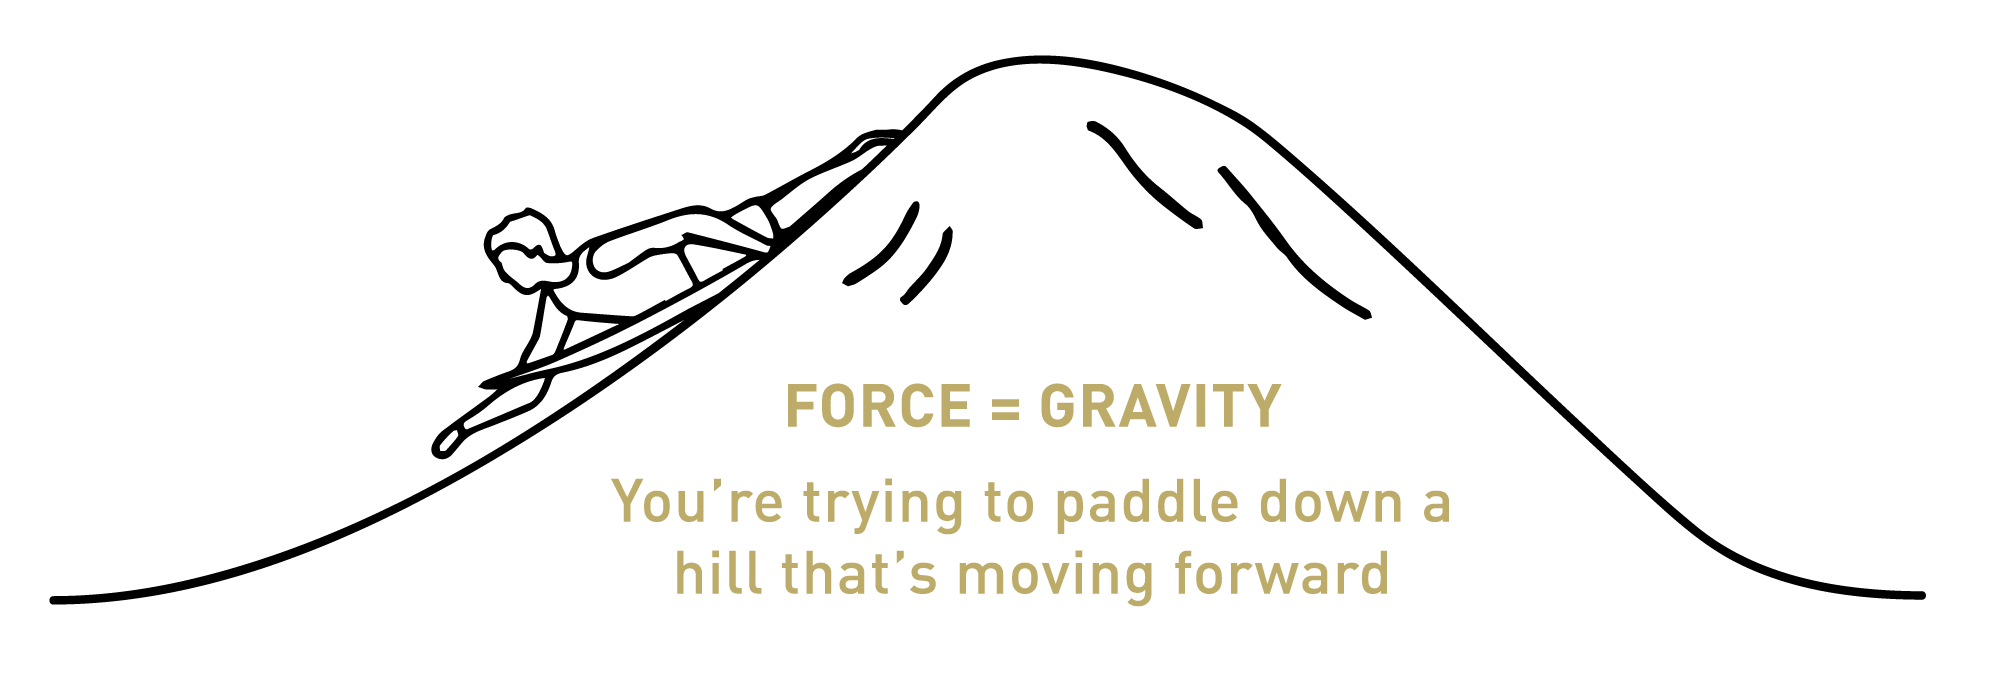 Wave Force = Gravity